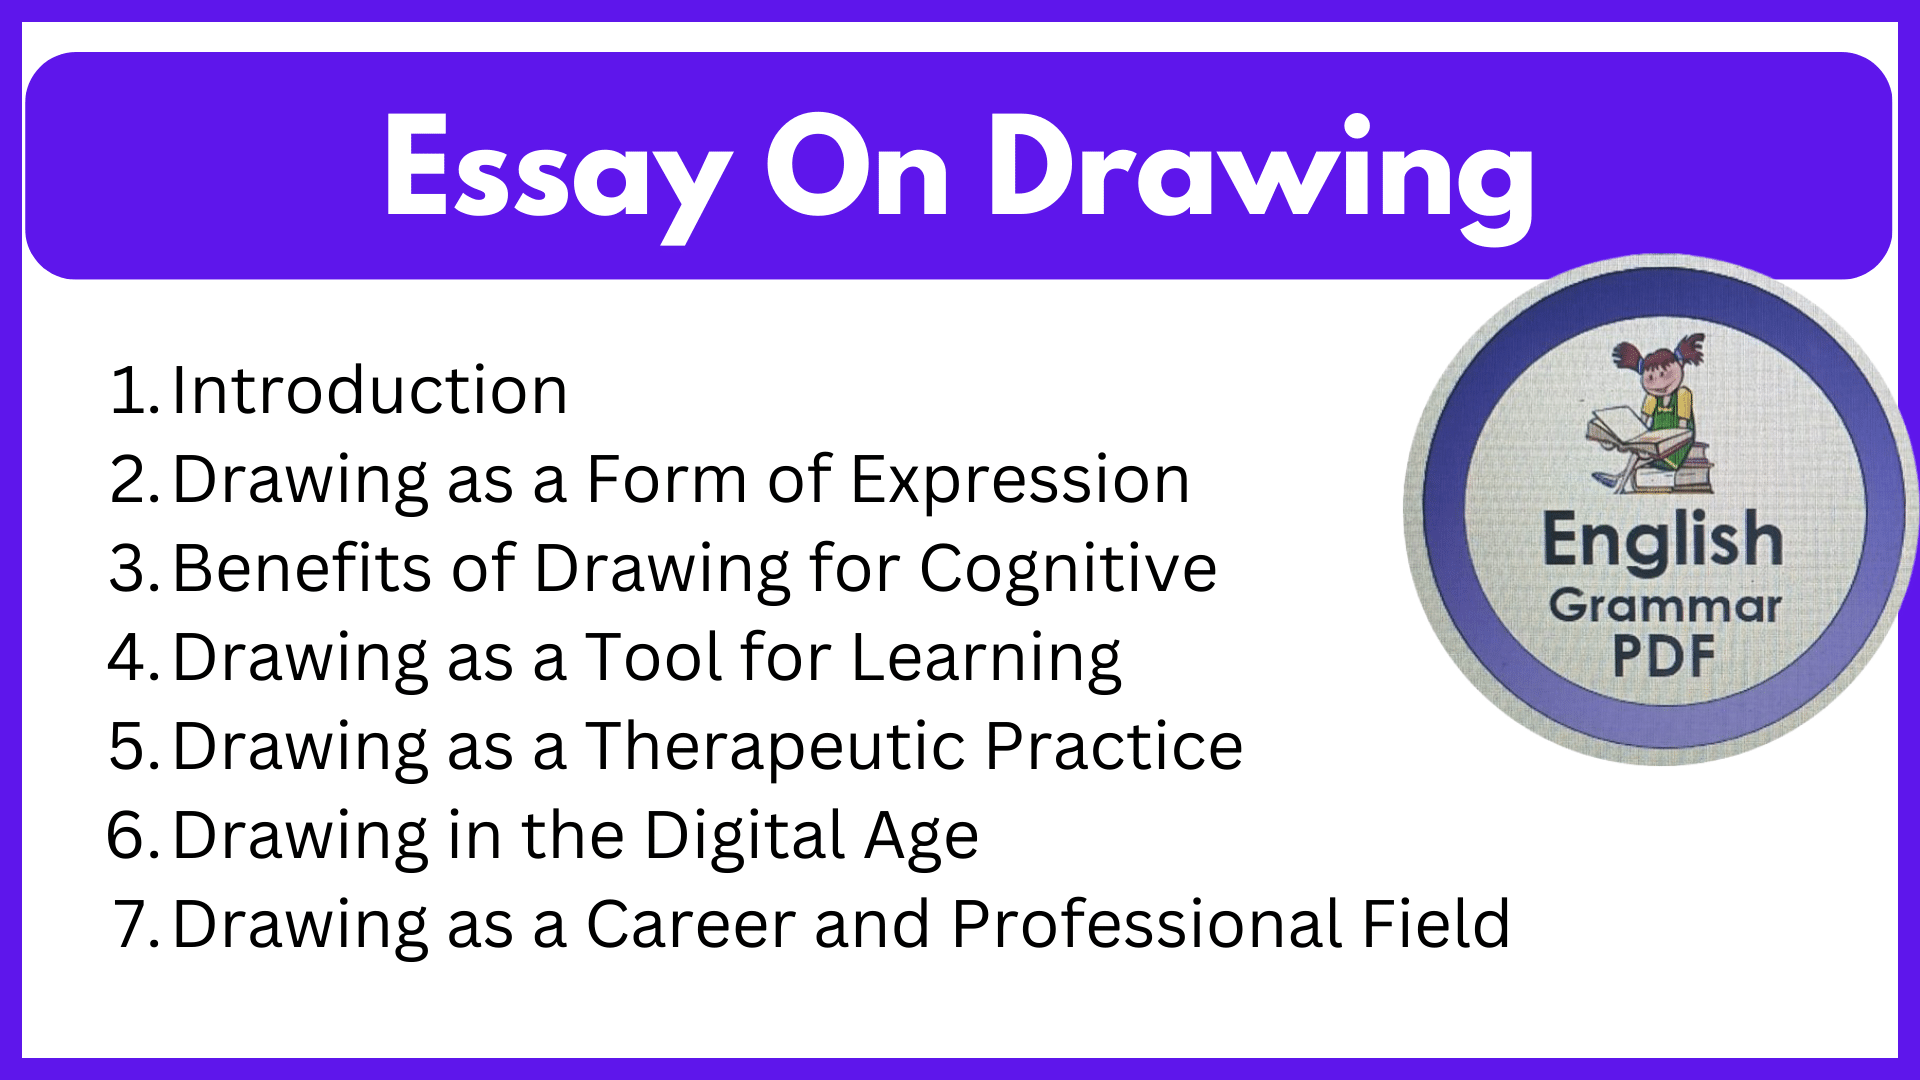 Essay On Drawing